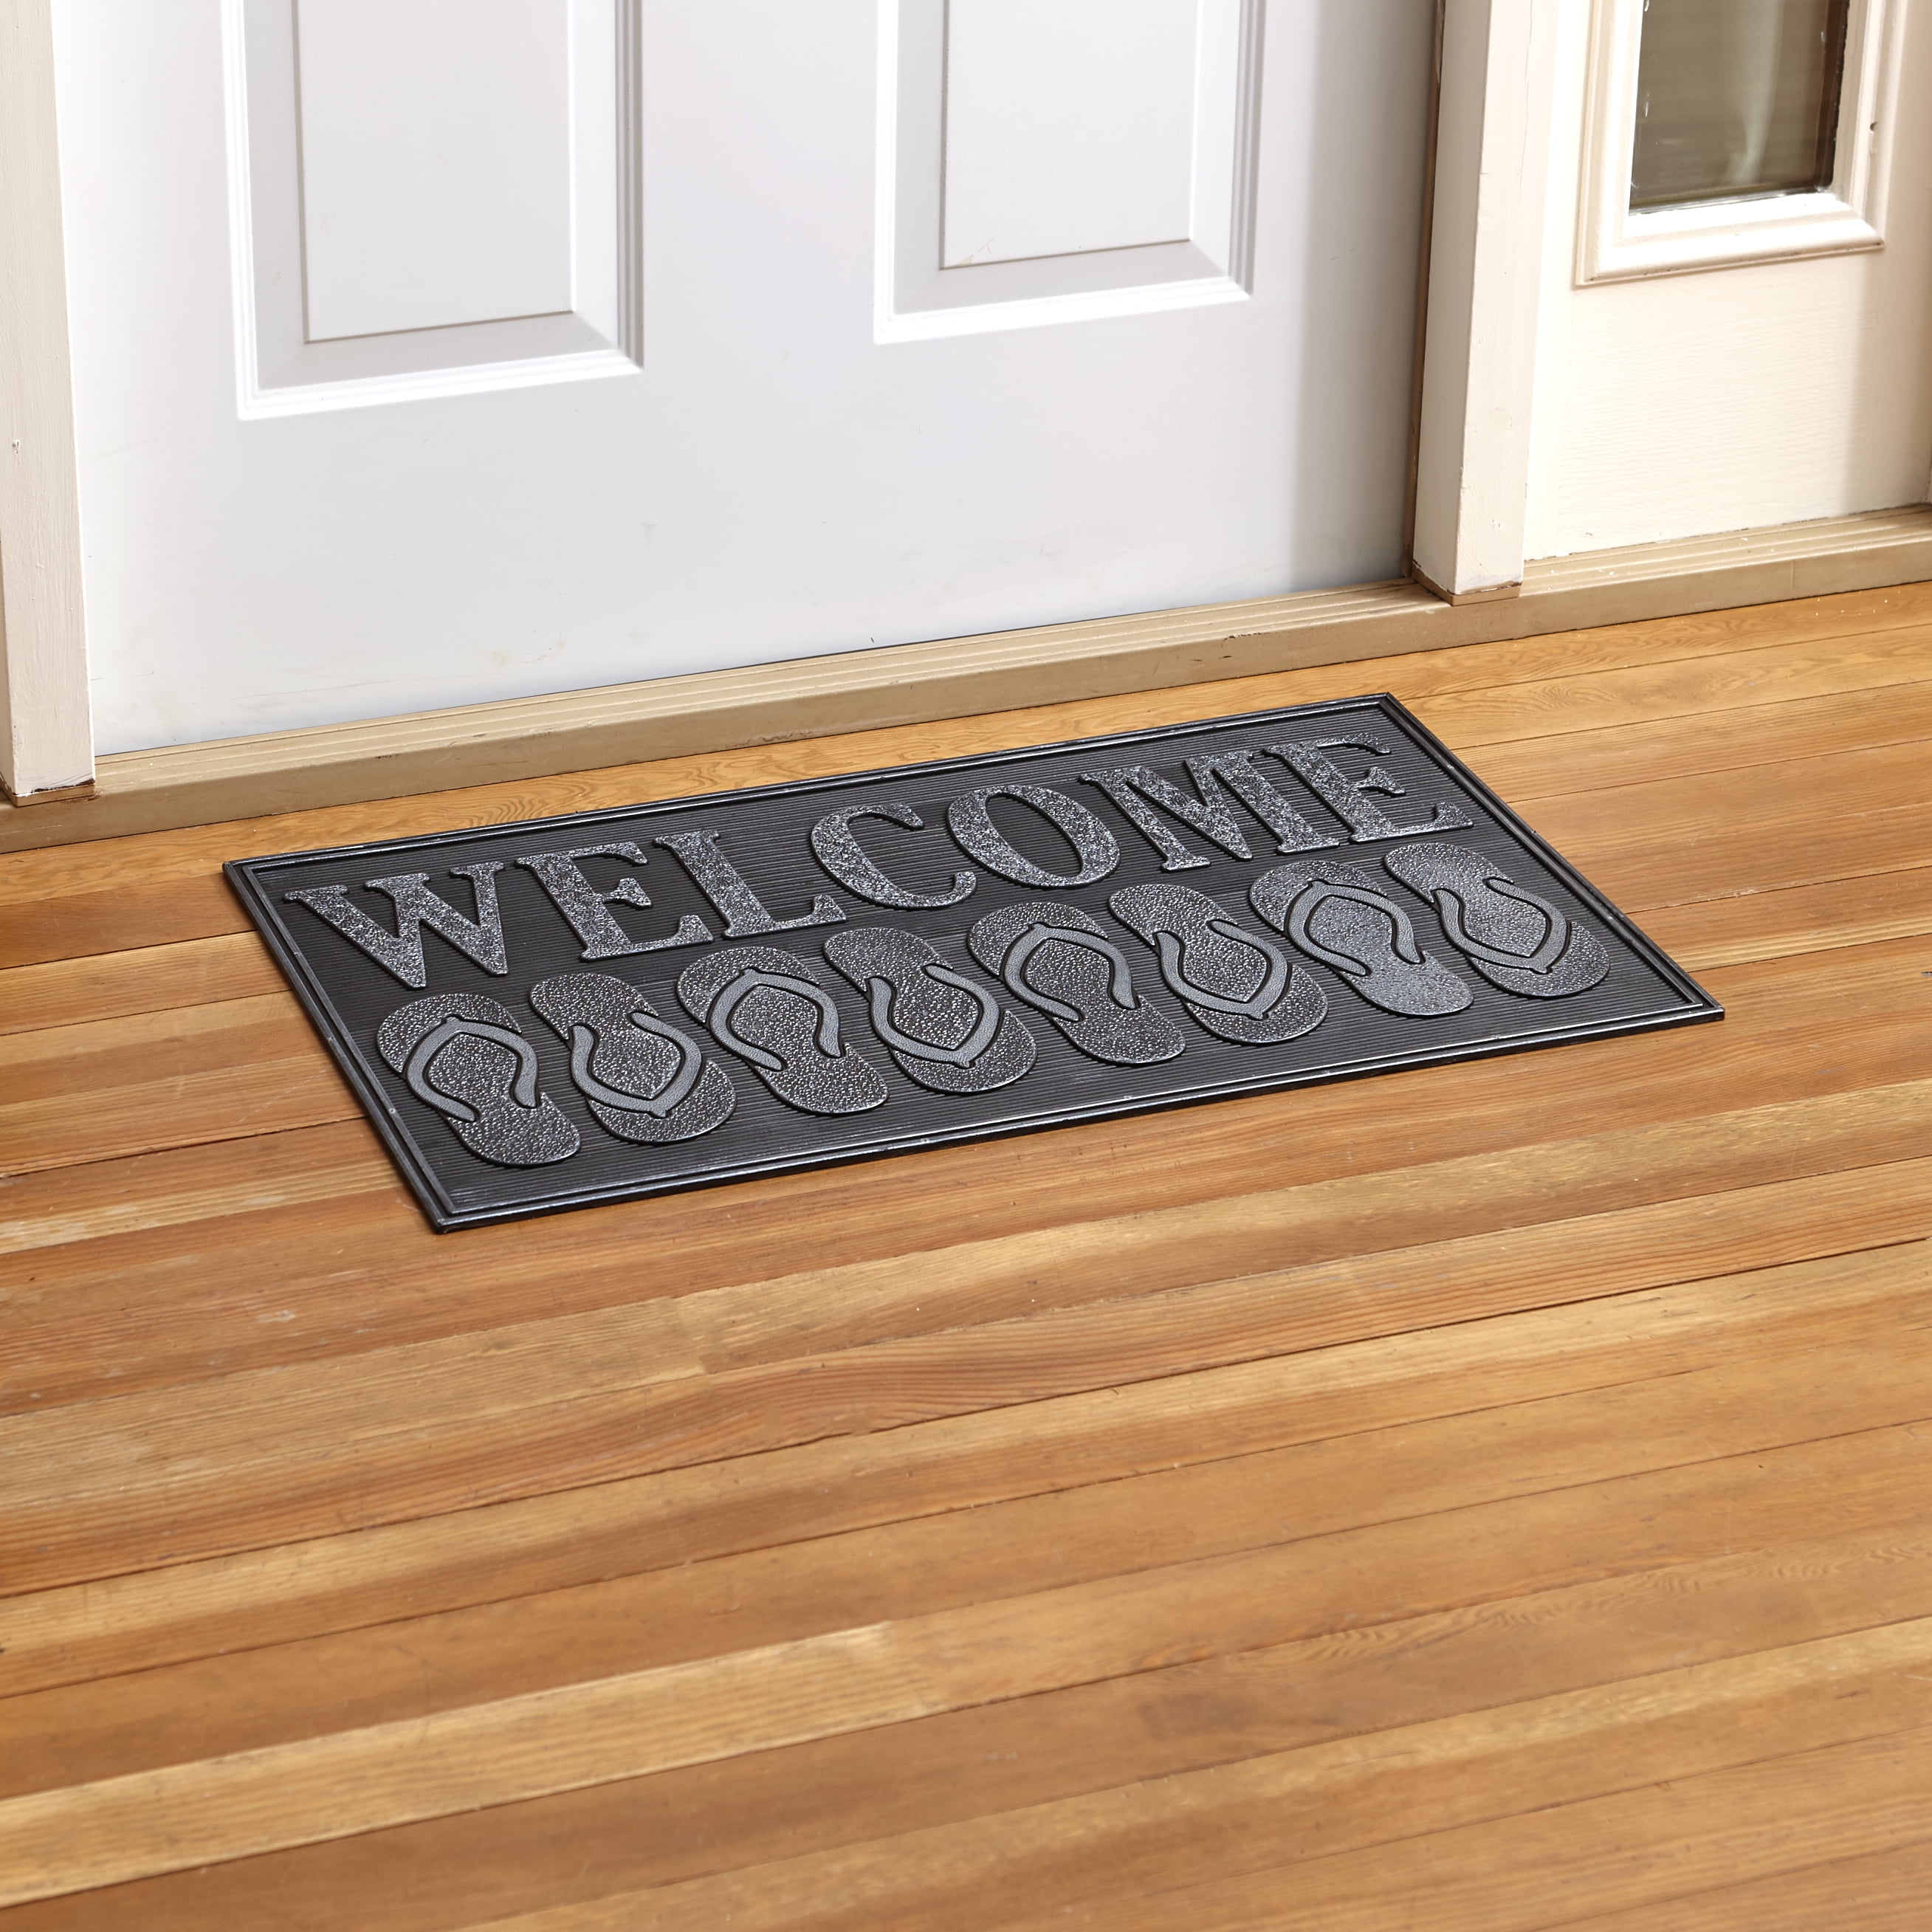 Welcome Aboard Naked Feet Only Lake/Beach Doormat, Doormats for Outside  19363